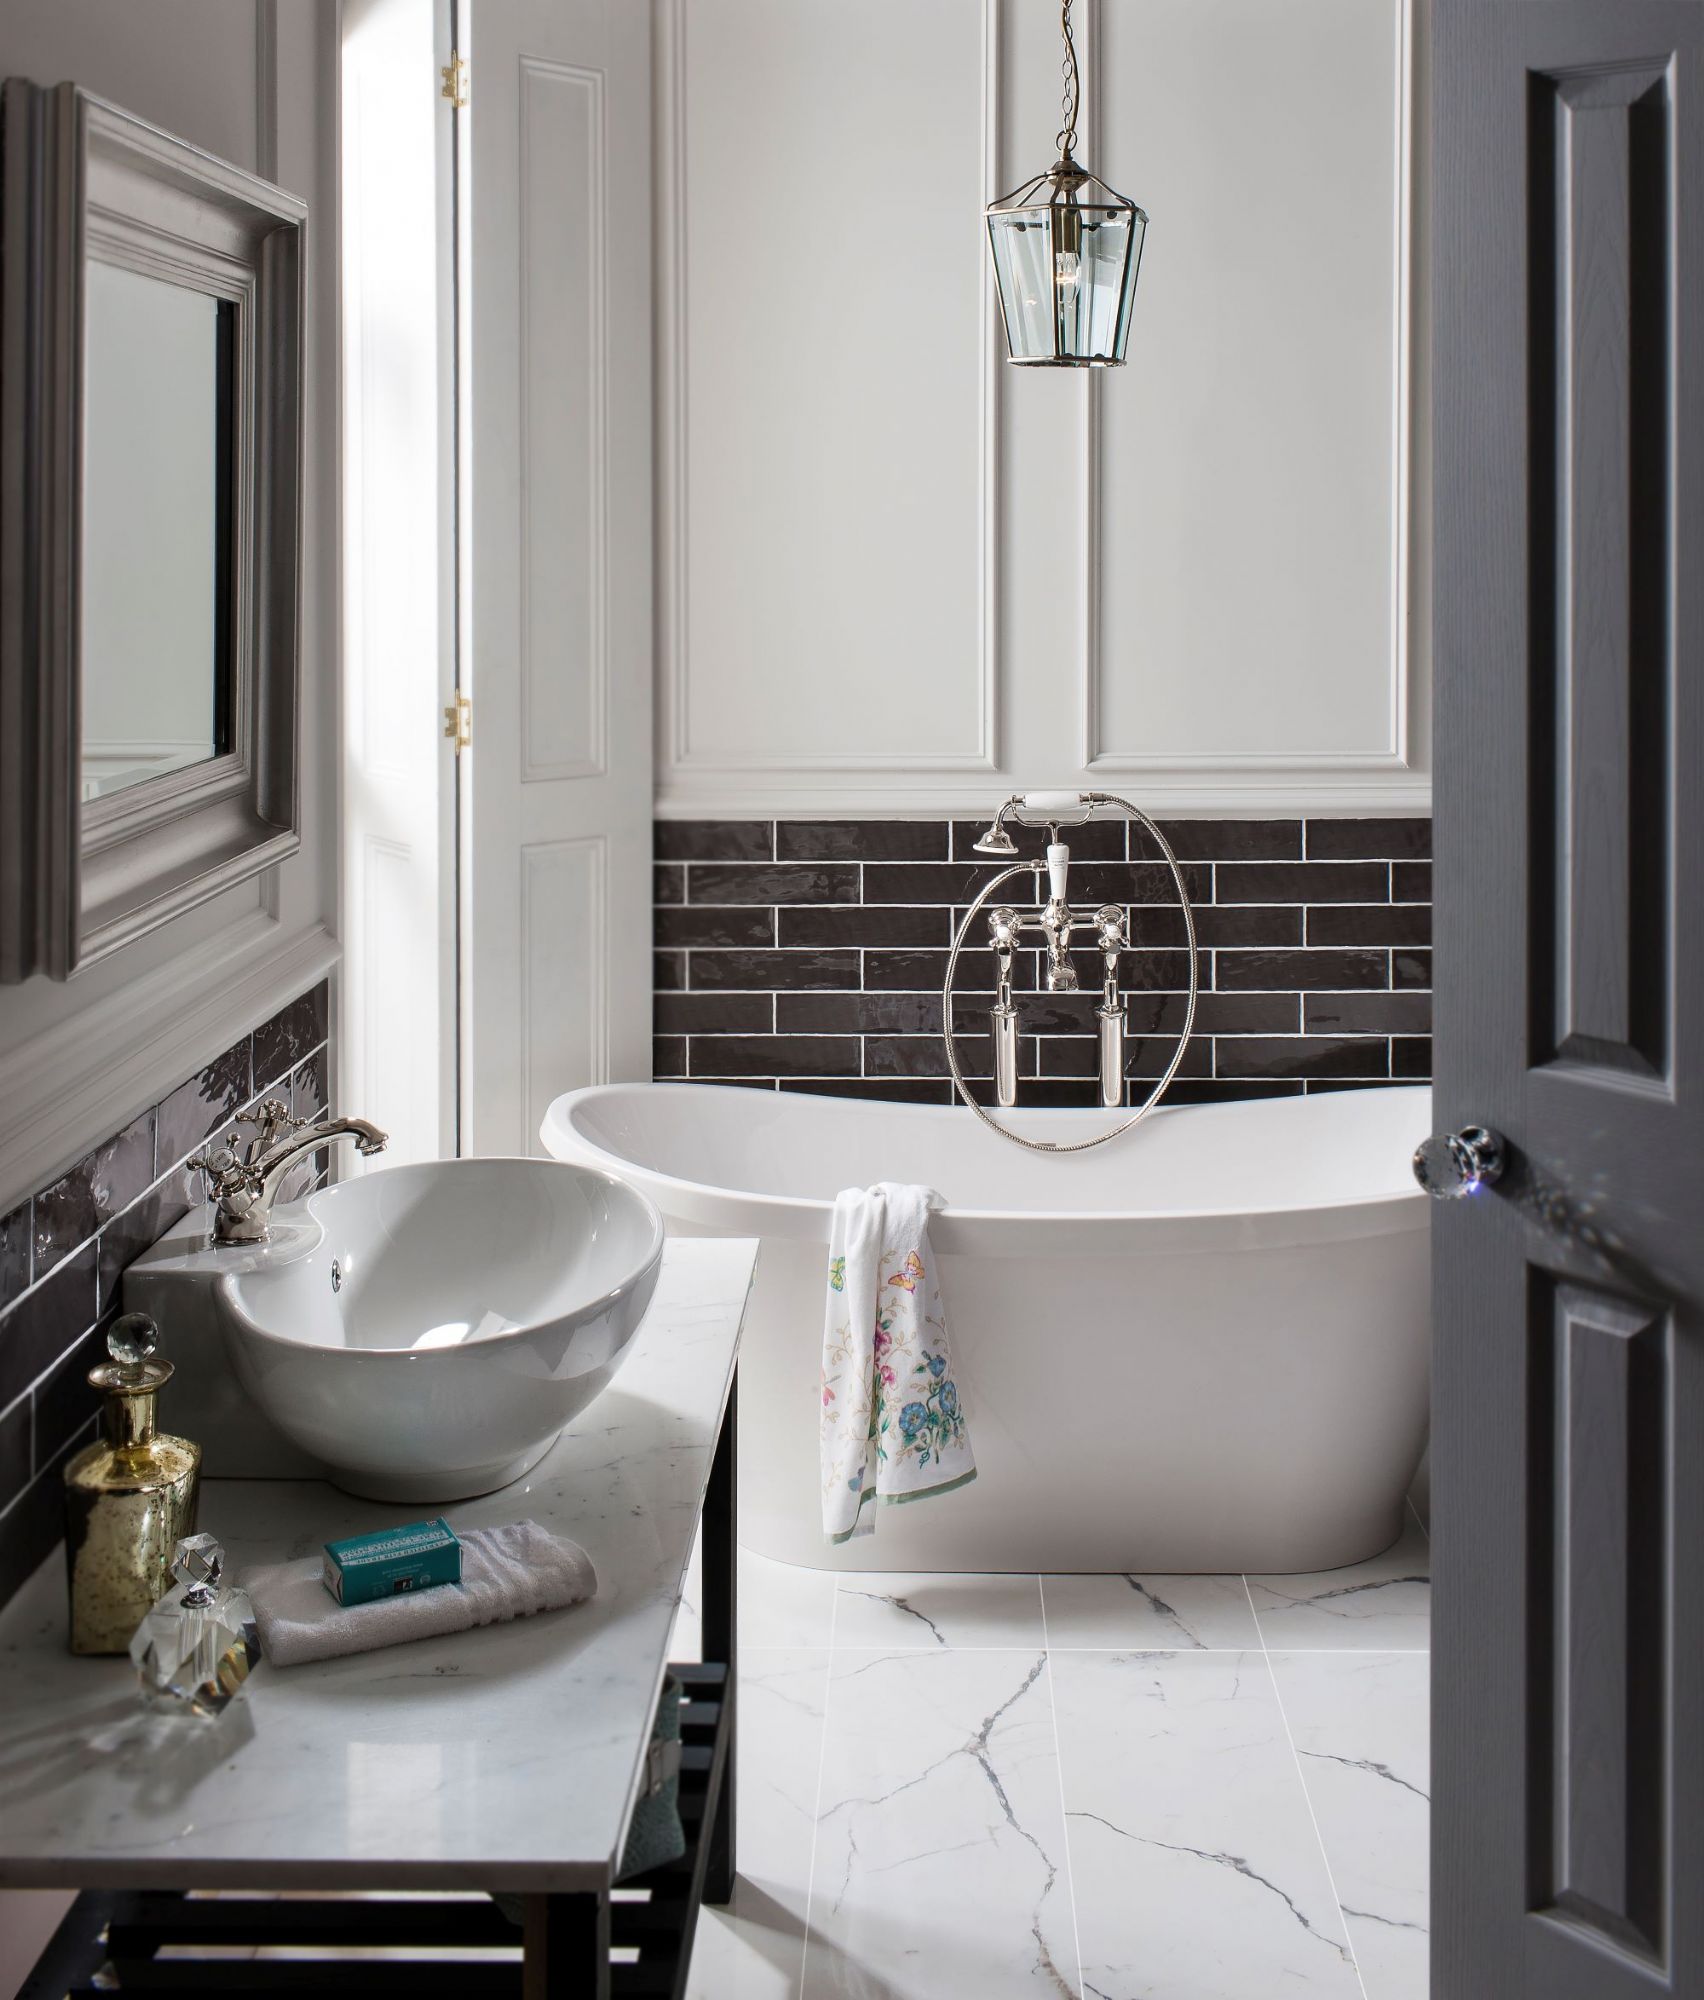 Shop the Original Floor-Mounted Bath and Shower Mixer featured above.